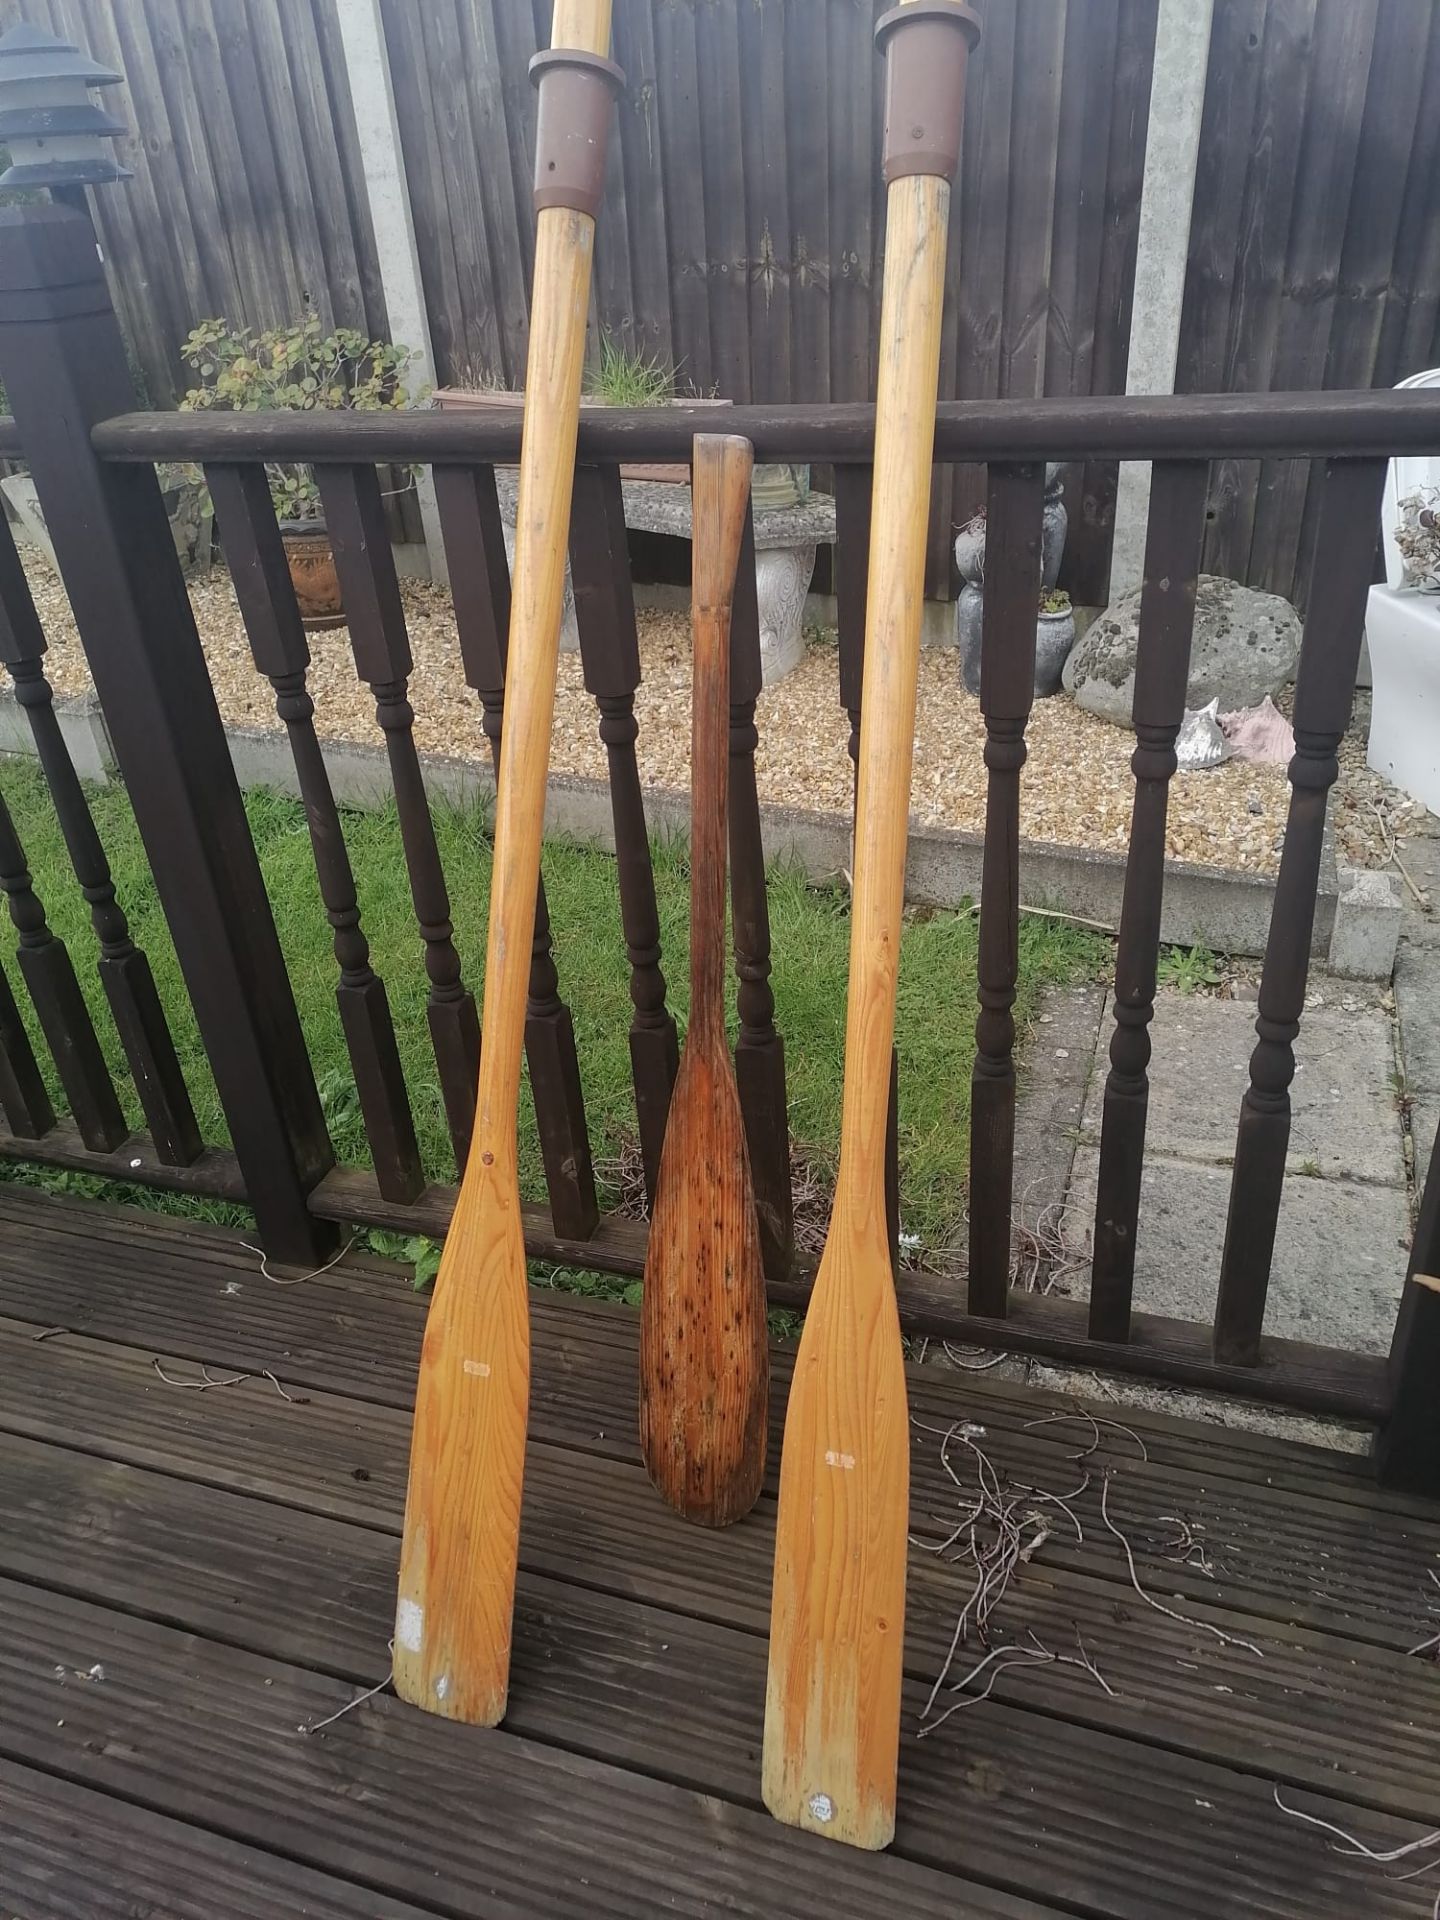 Pair of plastimo 6 ft oars and one tradional canoe paddle.